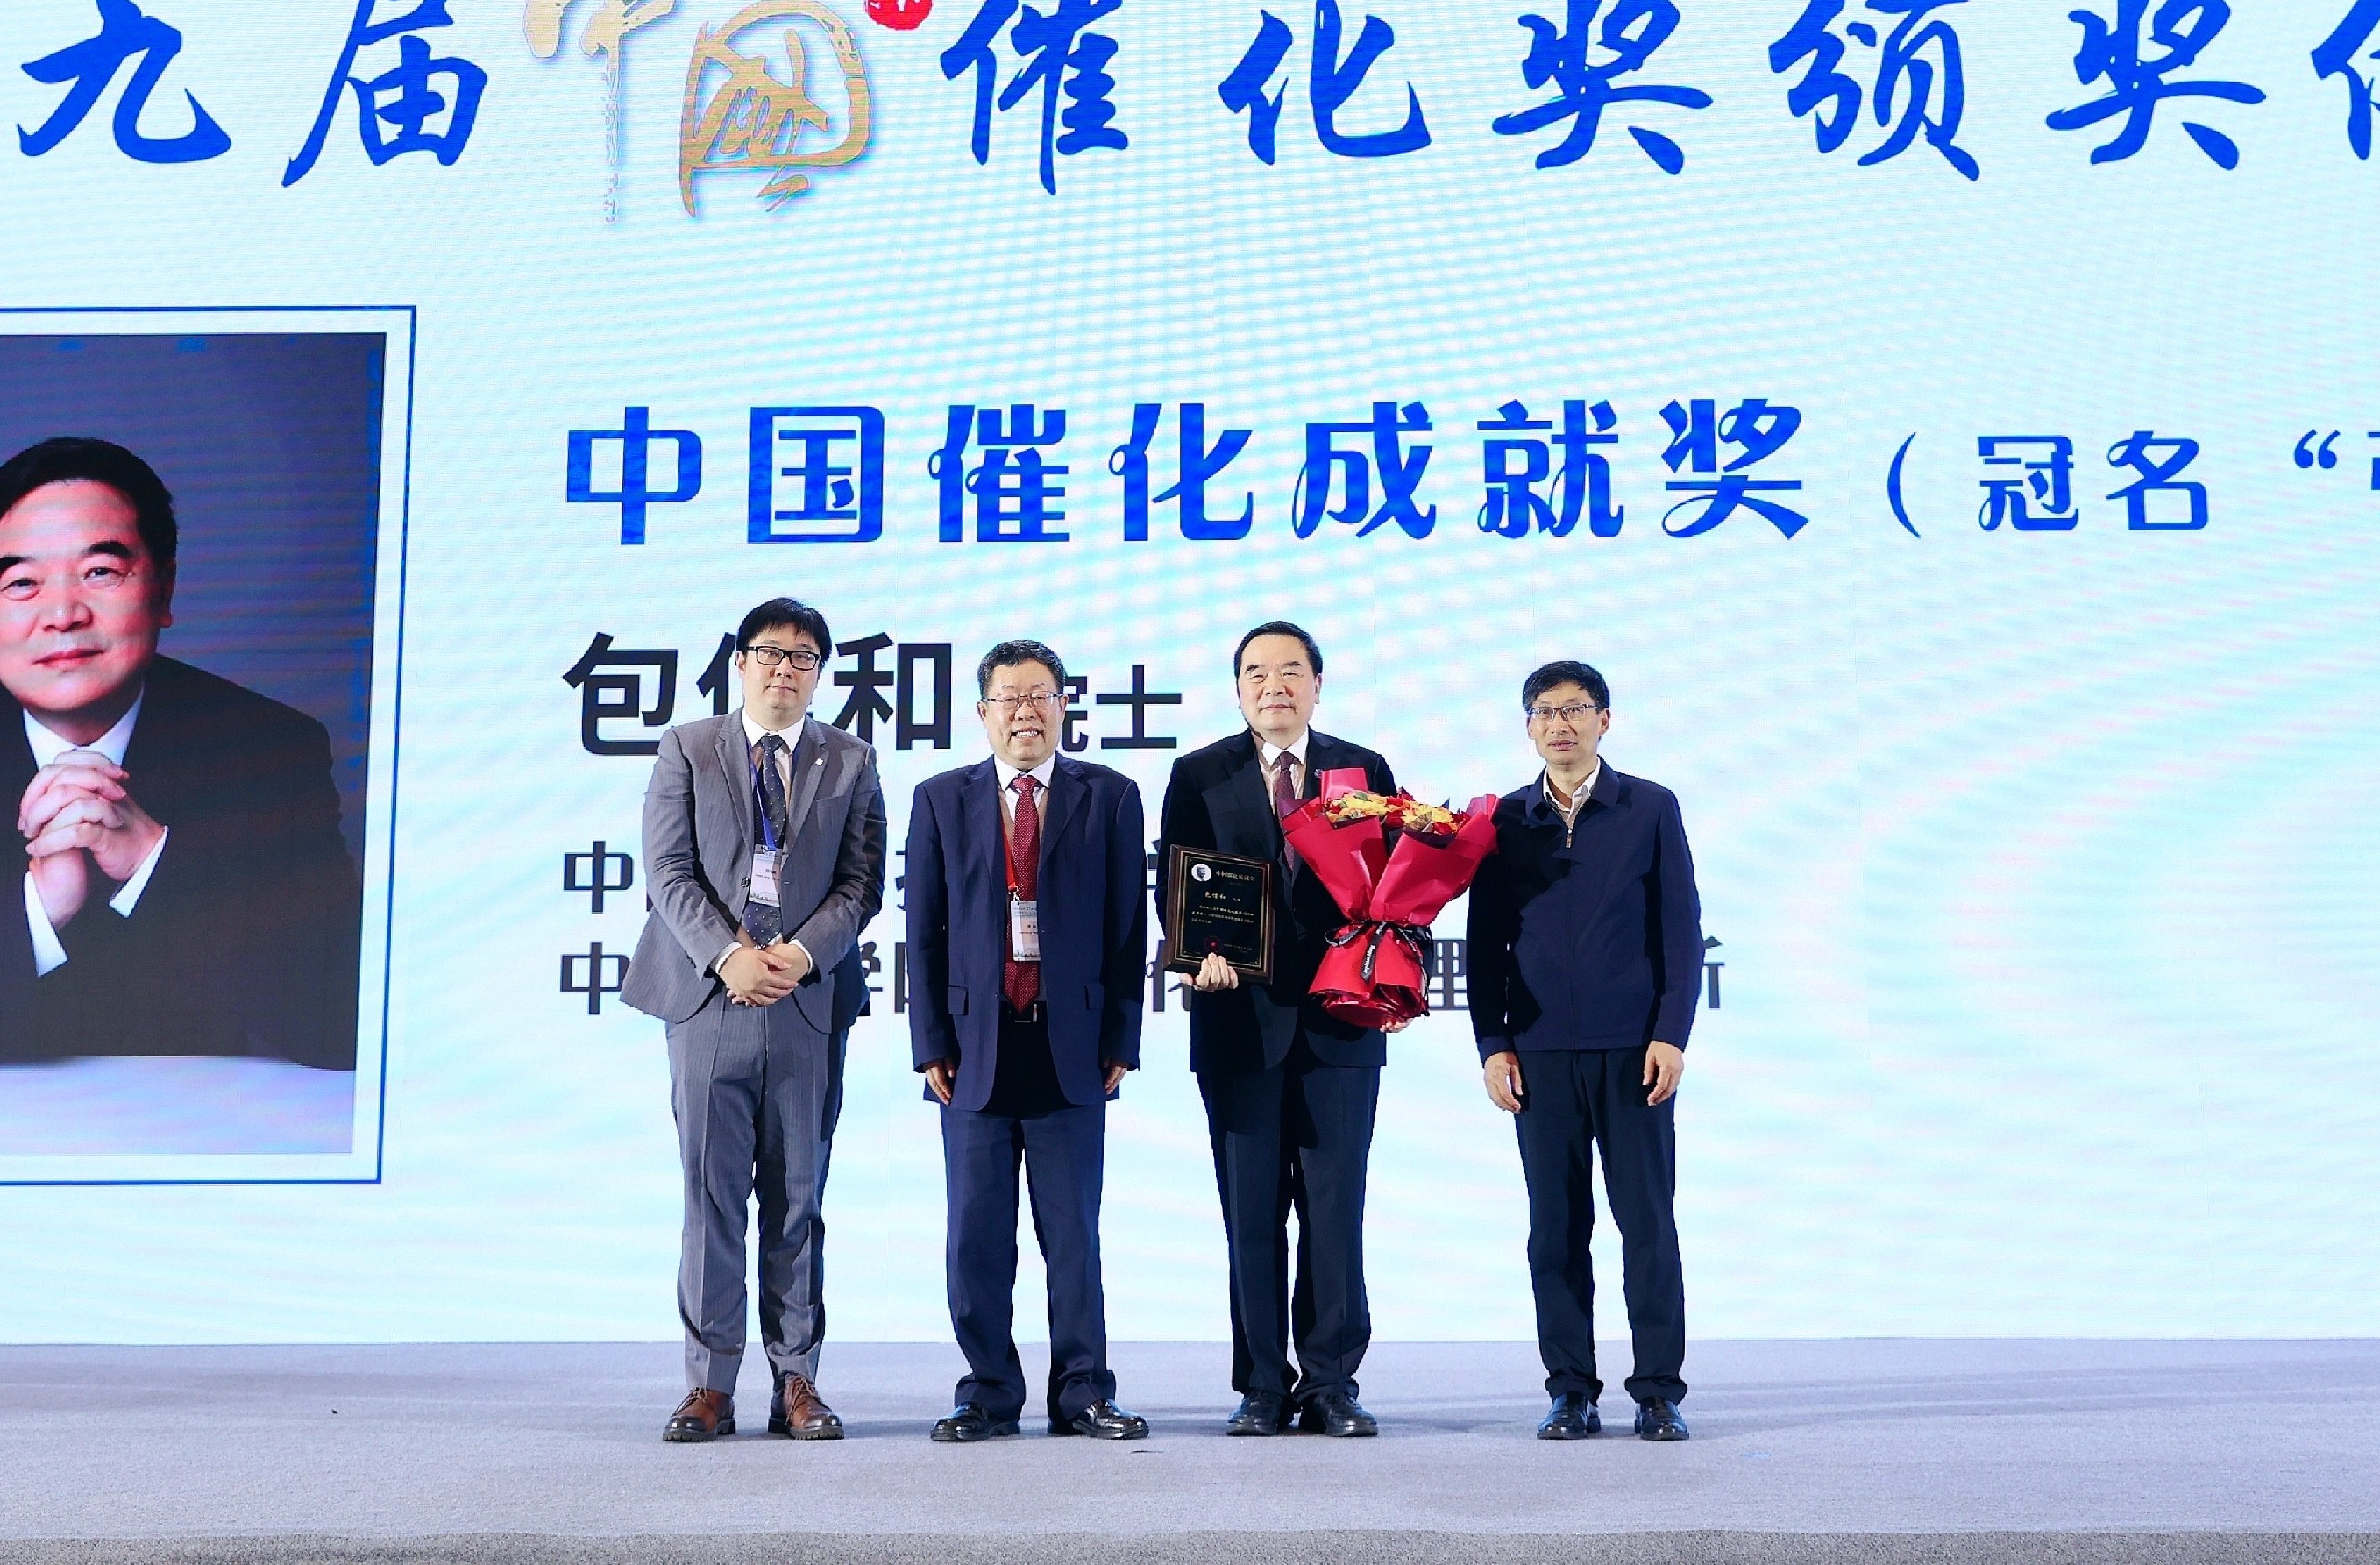 From left to right:Weixing Gu (Head of Catalysts R&D China, Clariant), Prof. Can Li (Member of the...